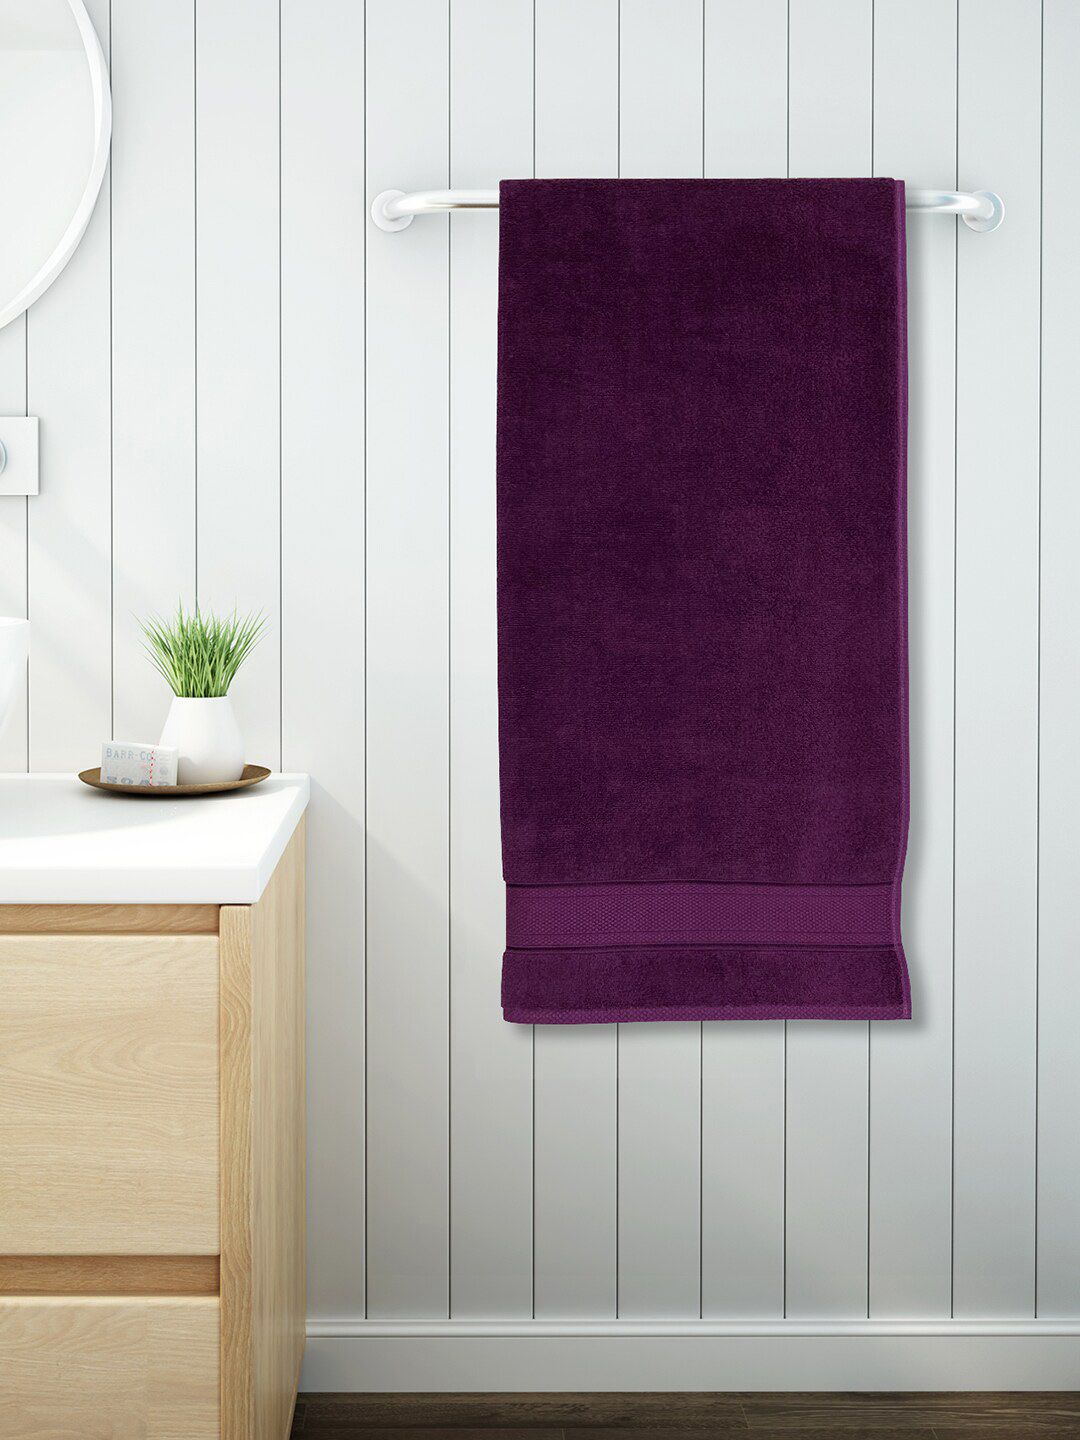 SPACES Violet Solid 550 GSM Cotton Bath Towels Price in India